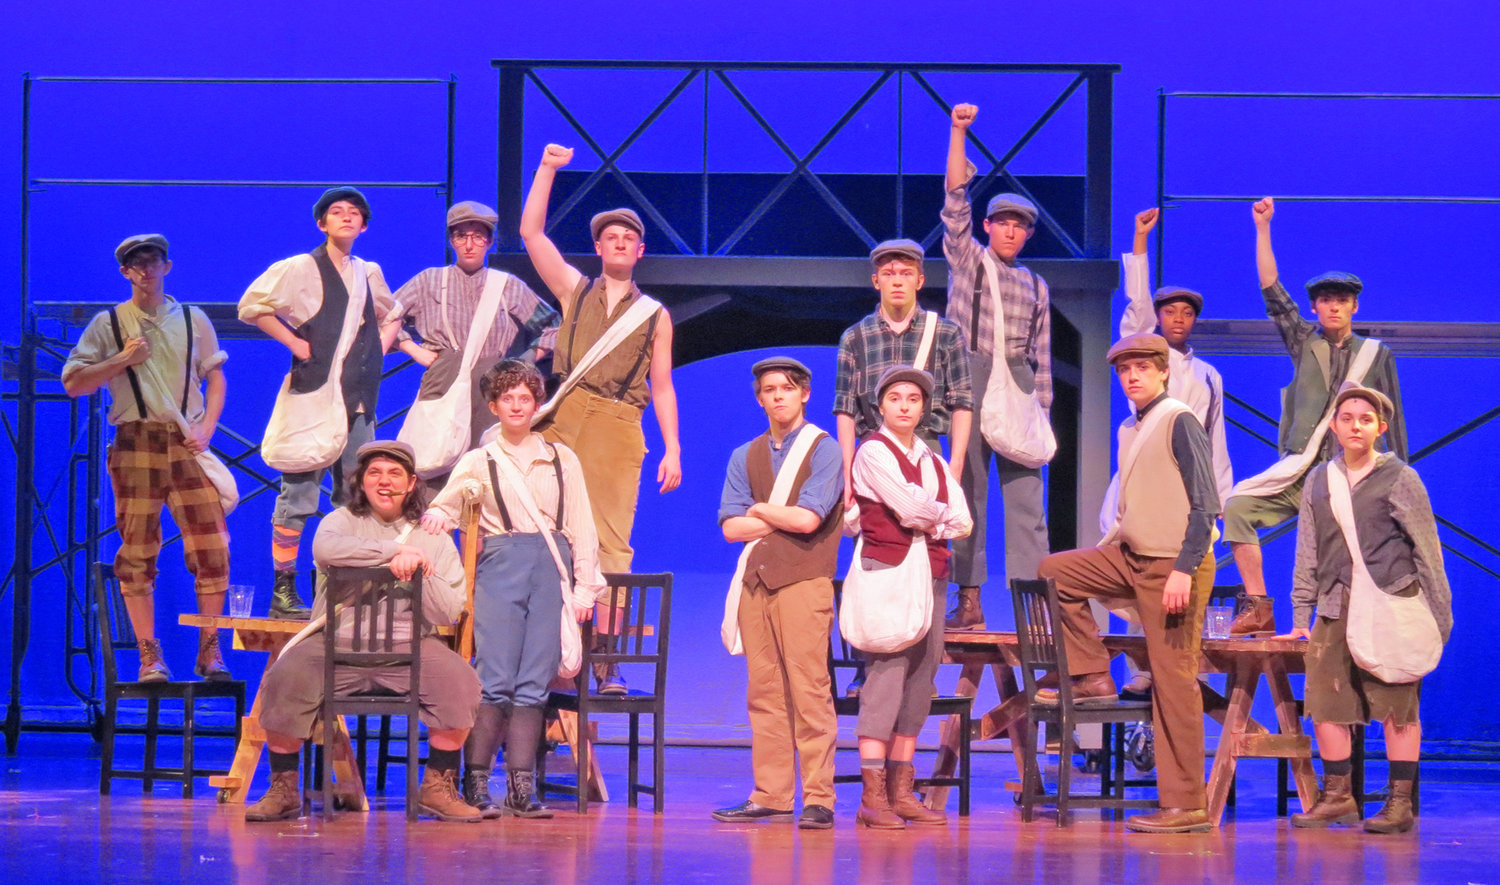 READ ALL ABOUT IT — Striking for better wages, the cast of Newsies will hit the stage Friday through Saturday at 7 p.m. Tickets are $8 in advance, or $10 at the door.